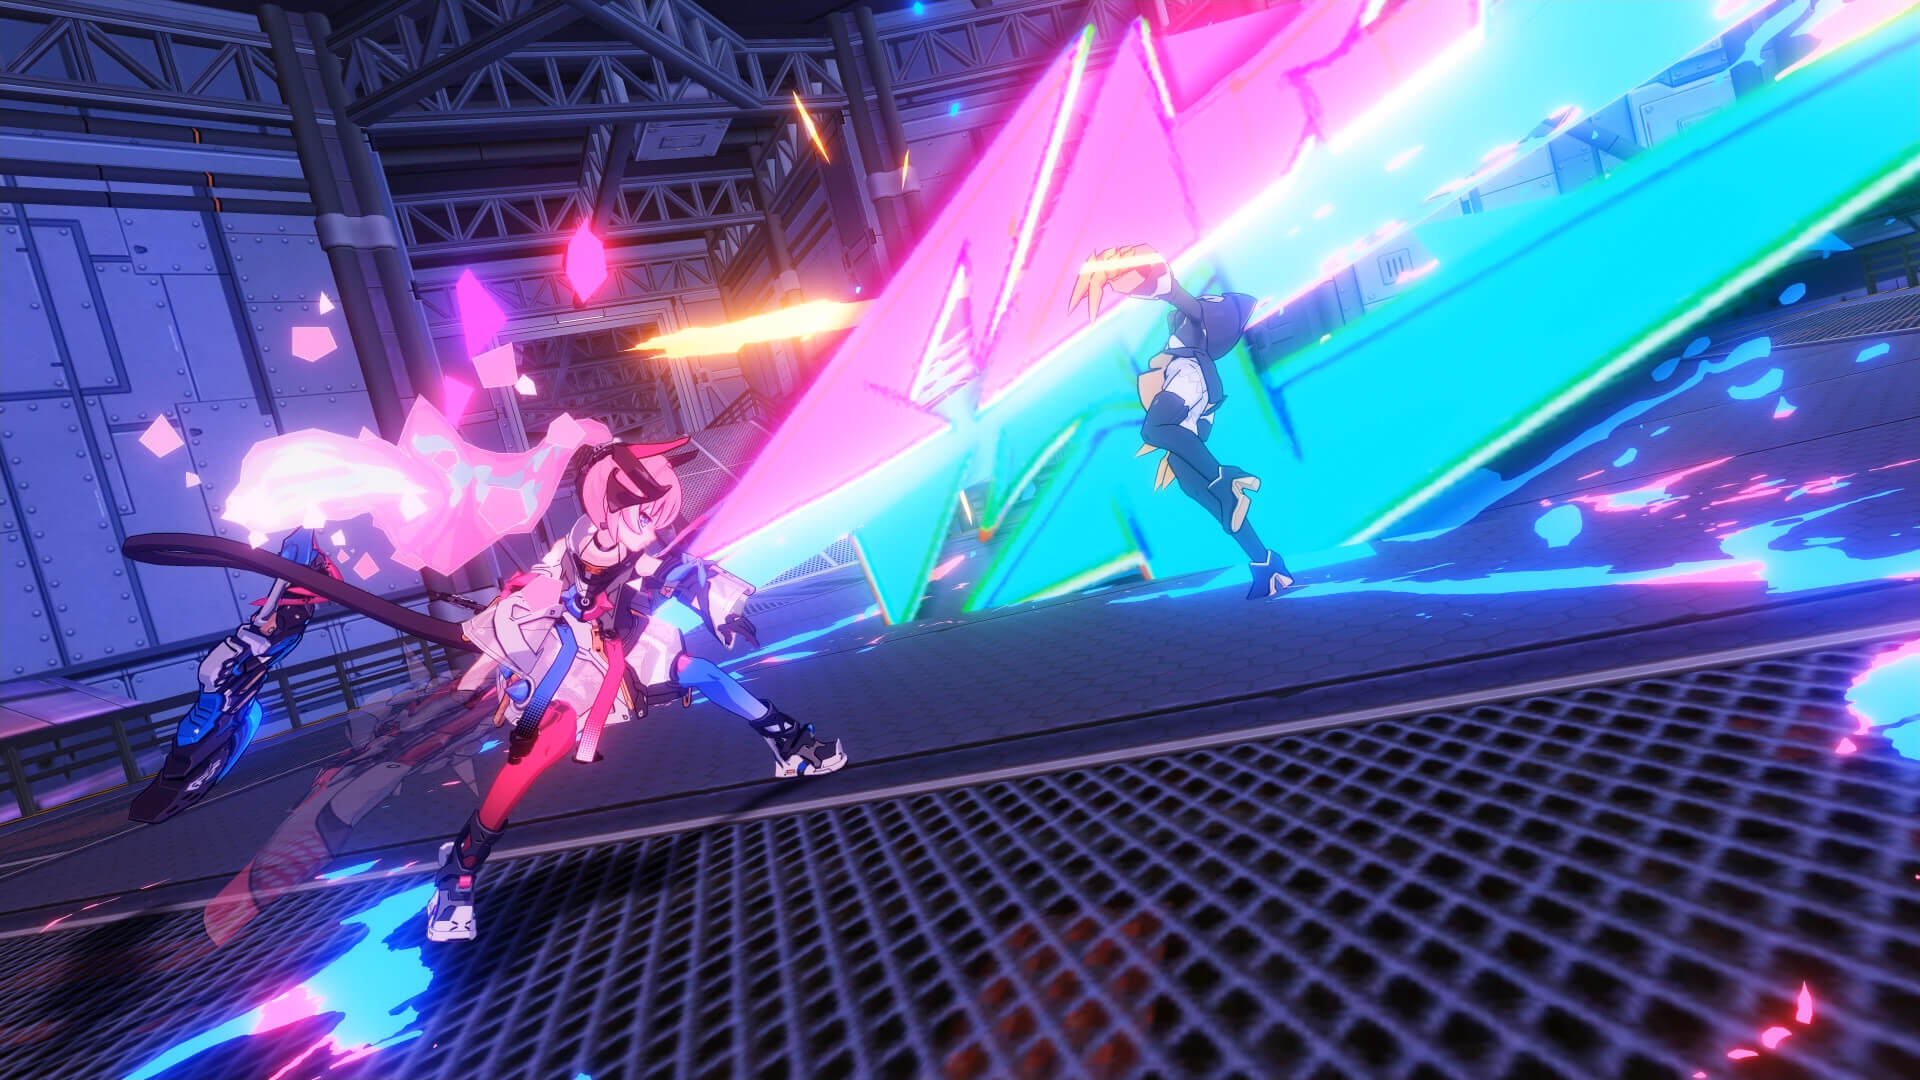 A combat sequence in Honkai Impact 3rd